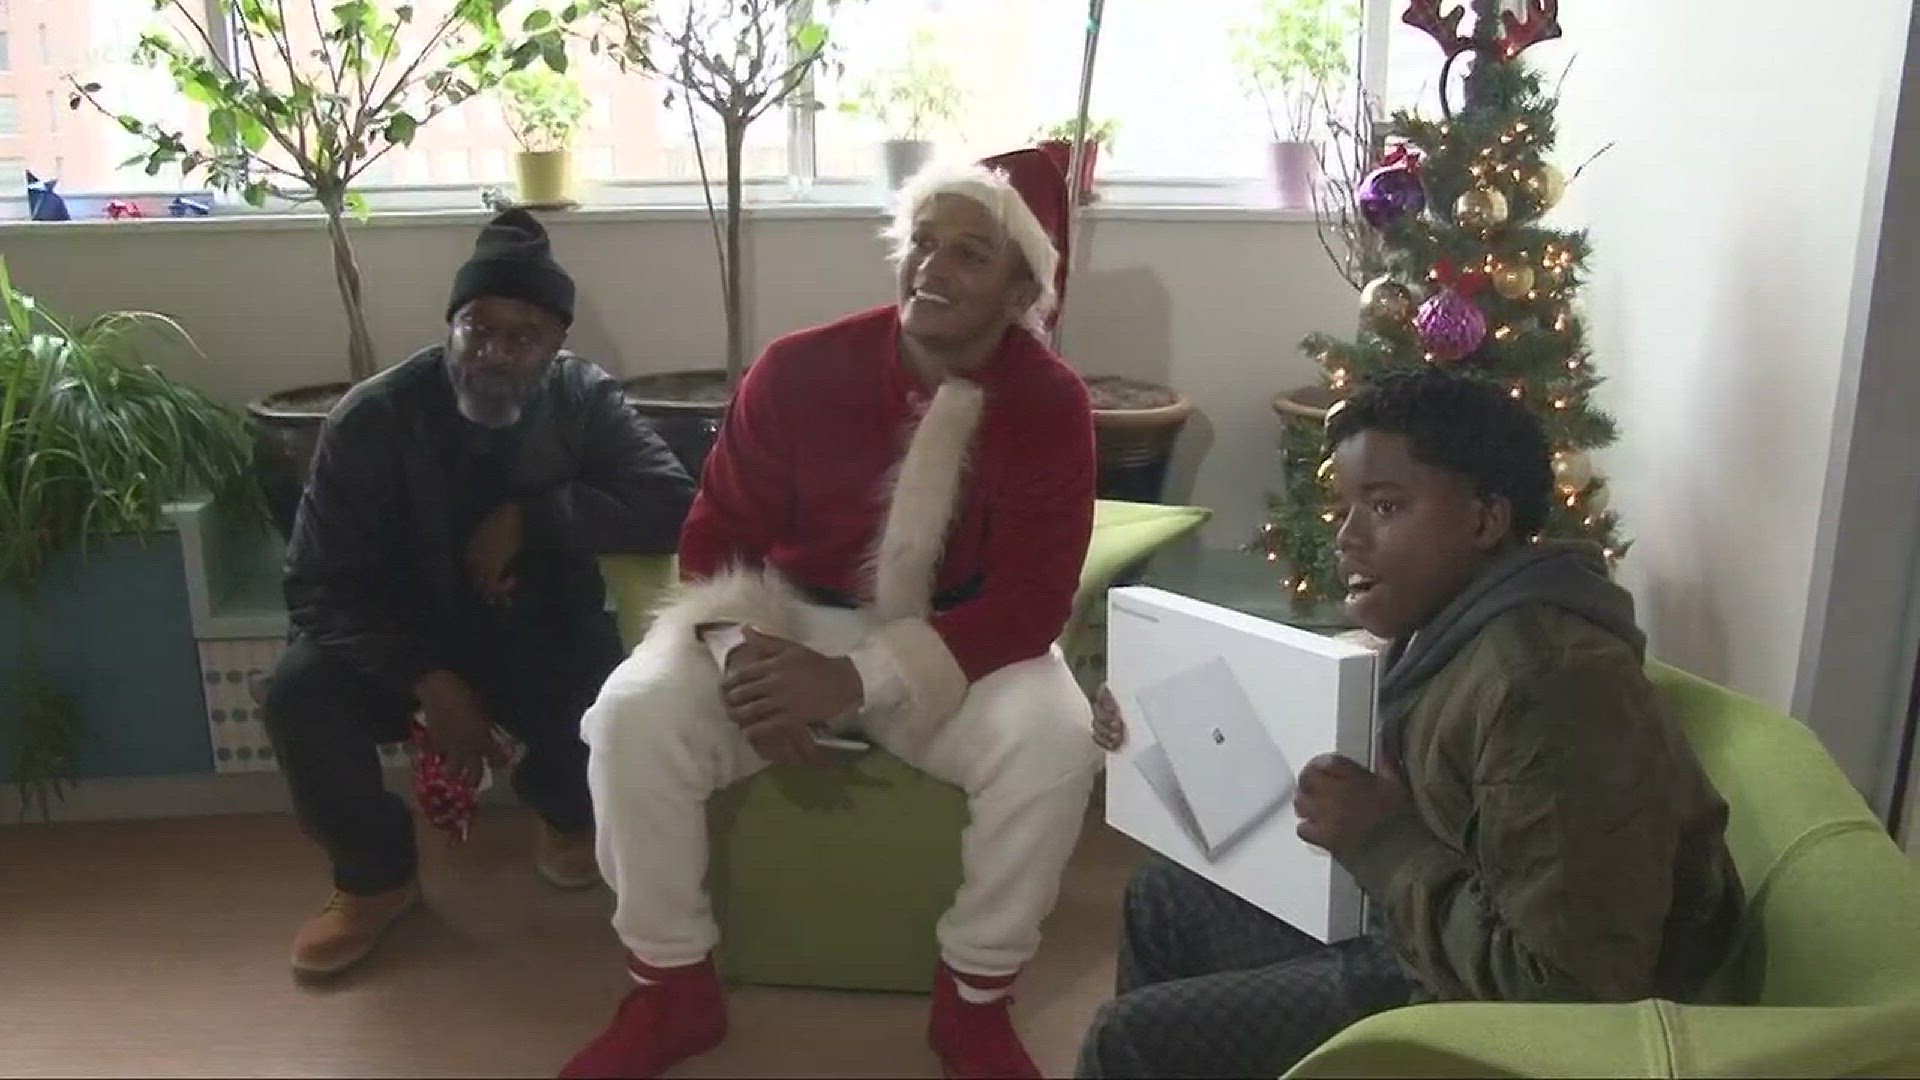 Deshone Kizer took on a different role,Tuesday spreading Christmas cheer